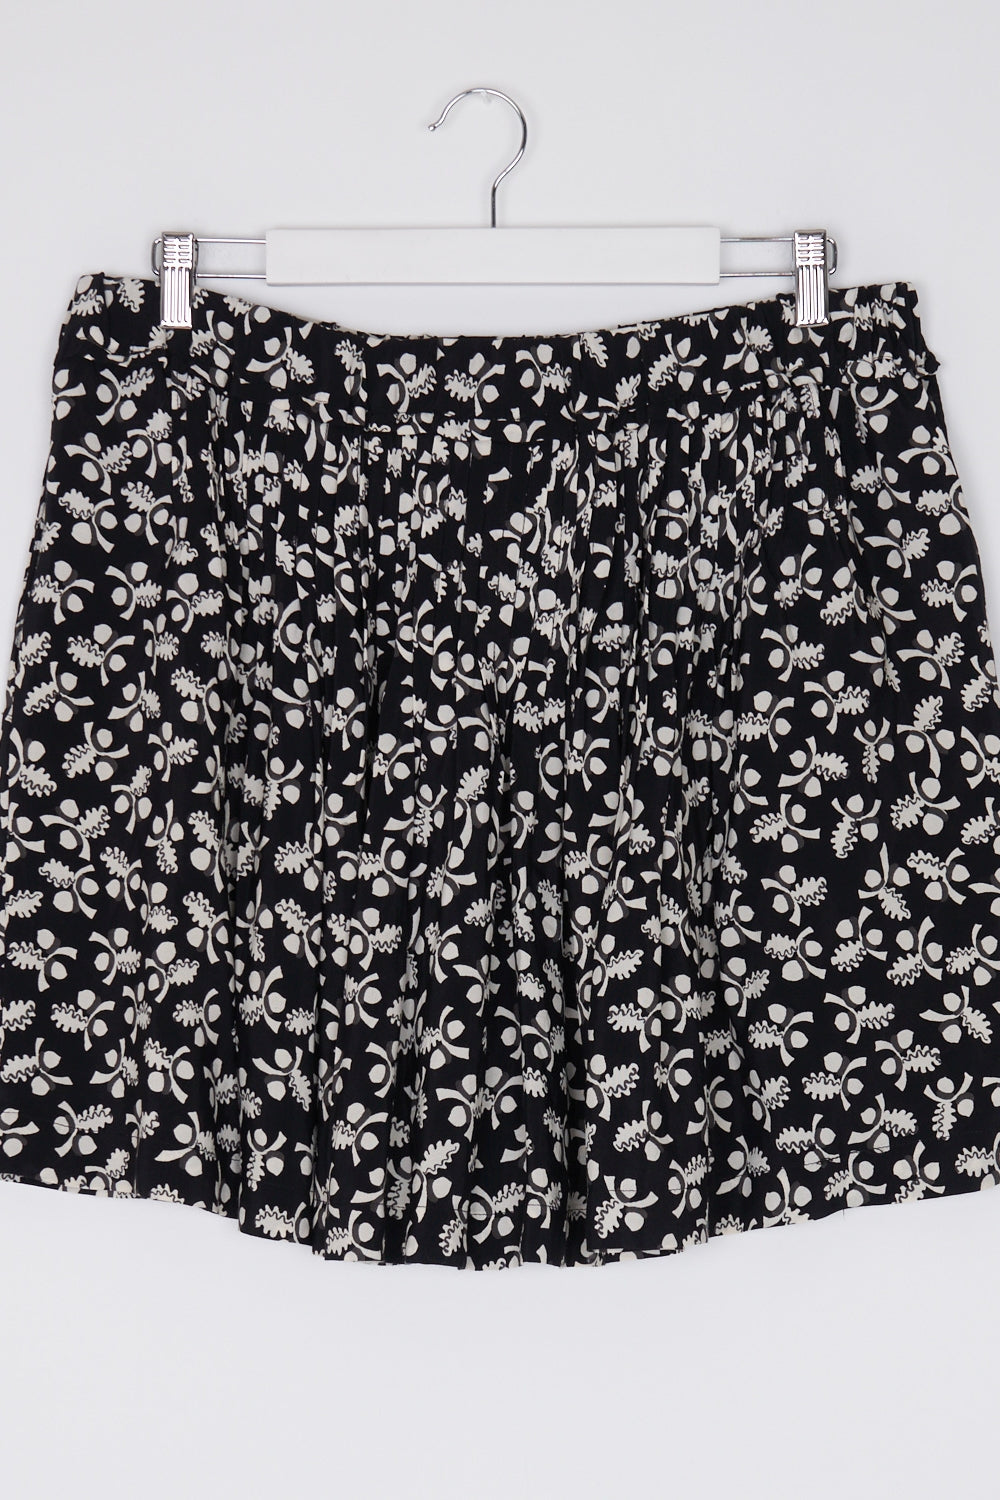 Country Road Black and White Patterned Skirt 16